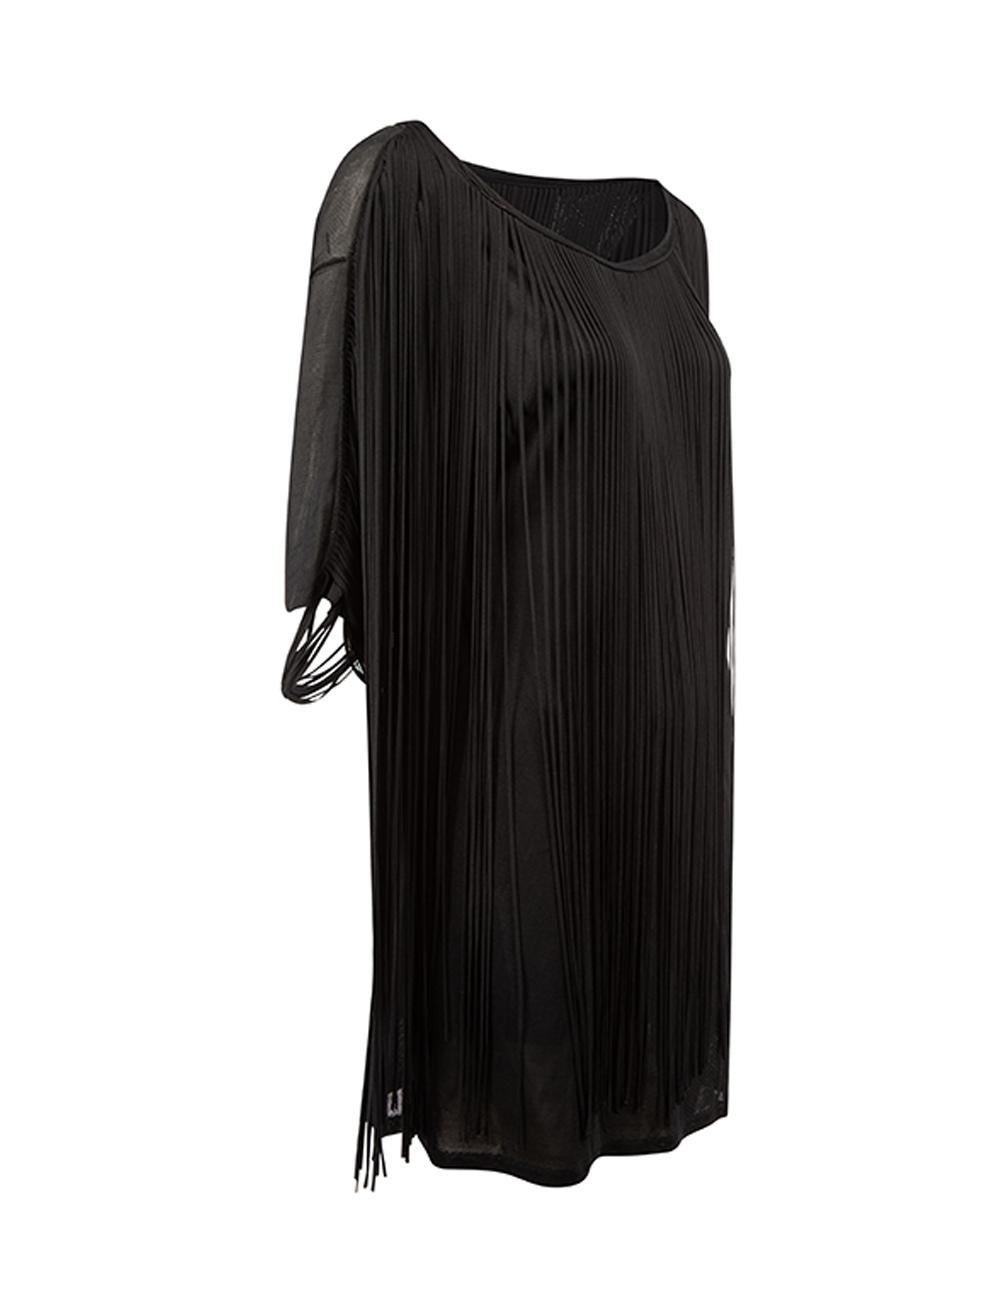 CONDITION is Very good. Minimal wear to dress is evident. Minimal wear to the brand logo and some of the long fringing on this used 3.1 Phillip Lim designer resale item. 



Details


Black

Synthetic

Mini dress

Fringing detail

Round